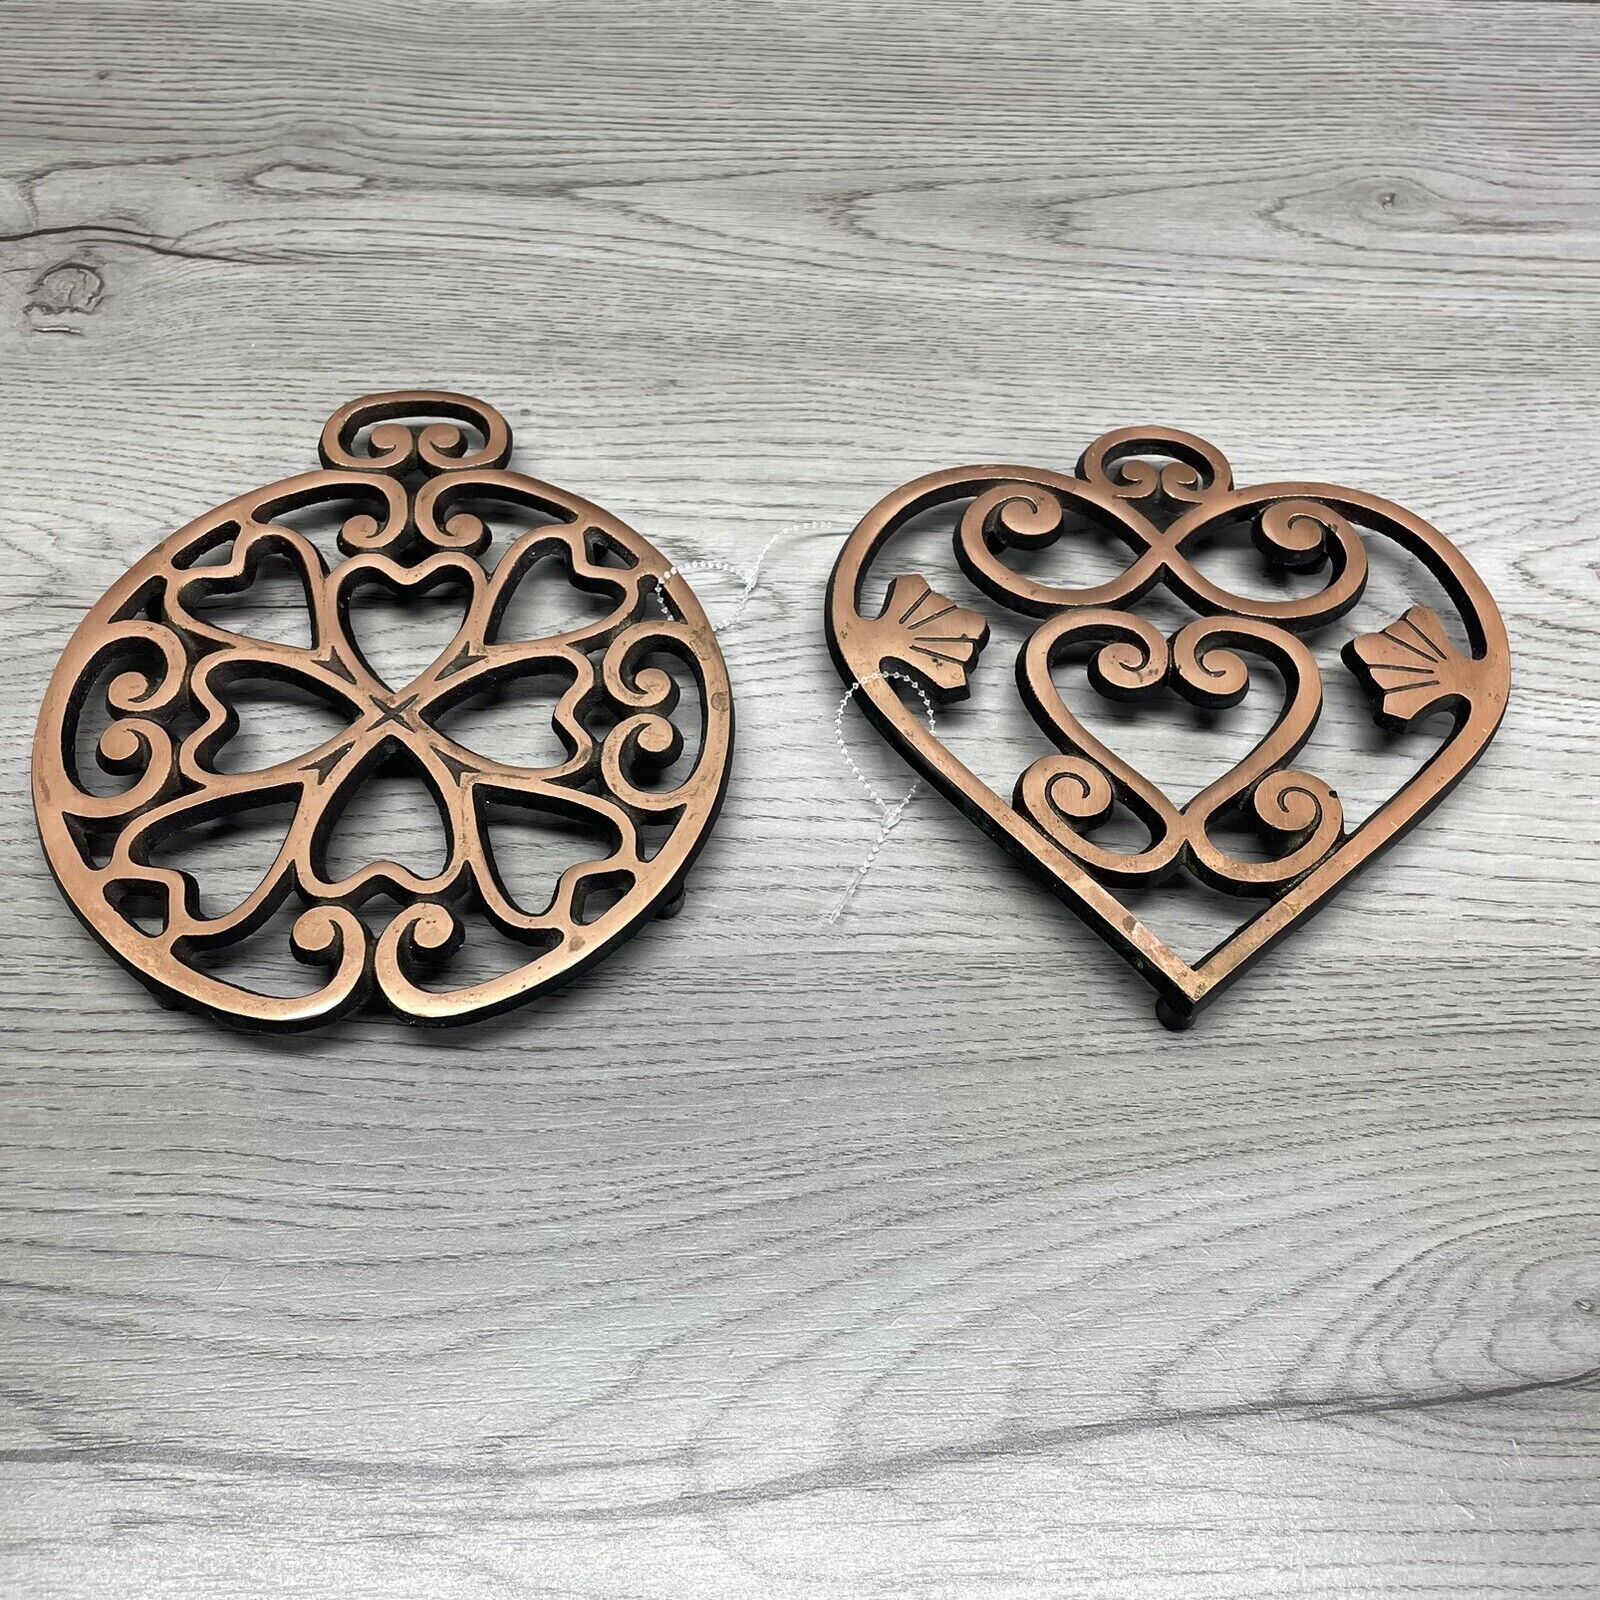 Pampered Chef Trivets One Round and One Heart Shaped. Copper color Heavy